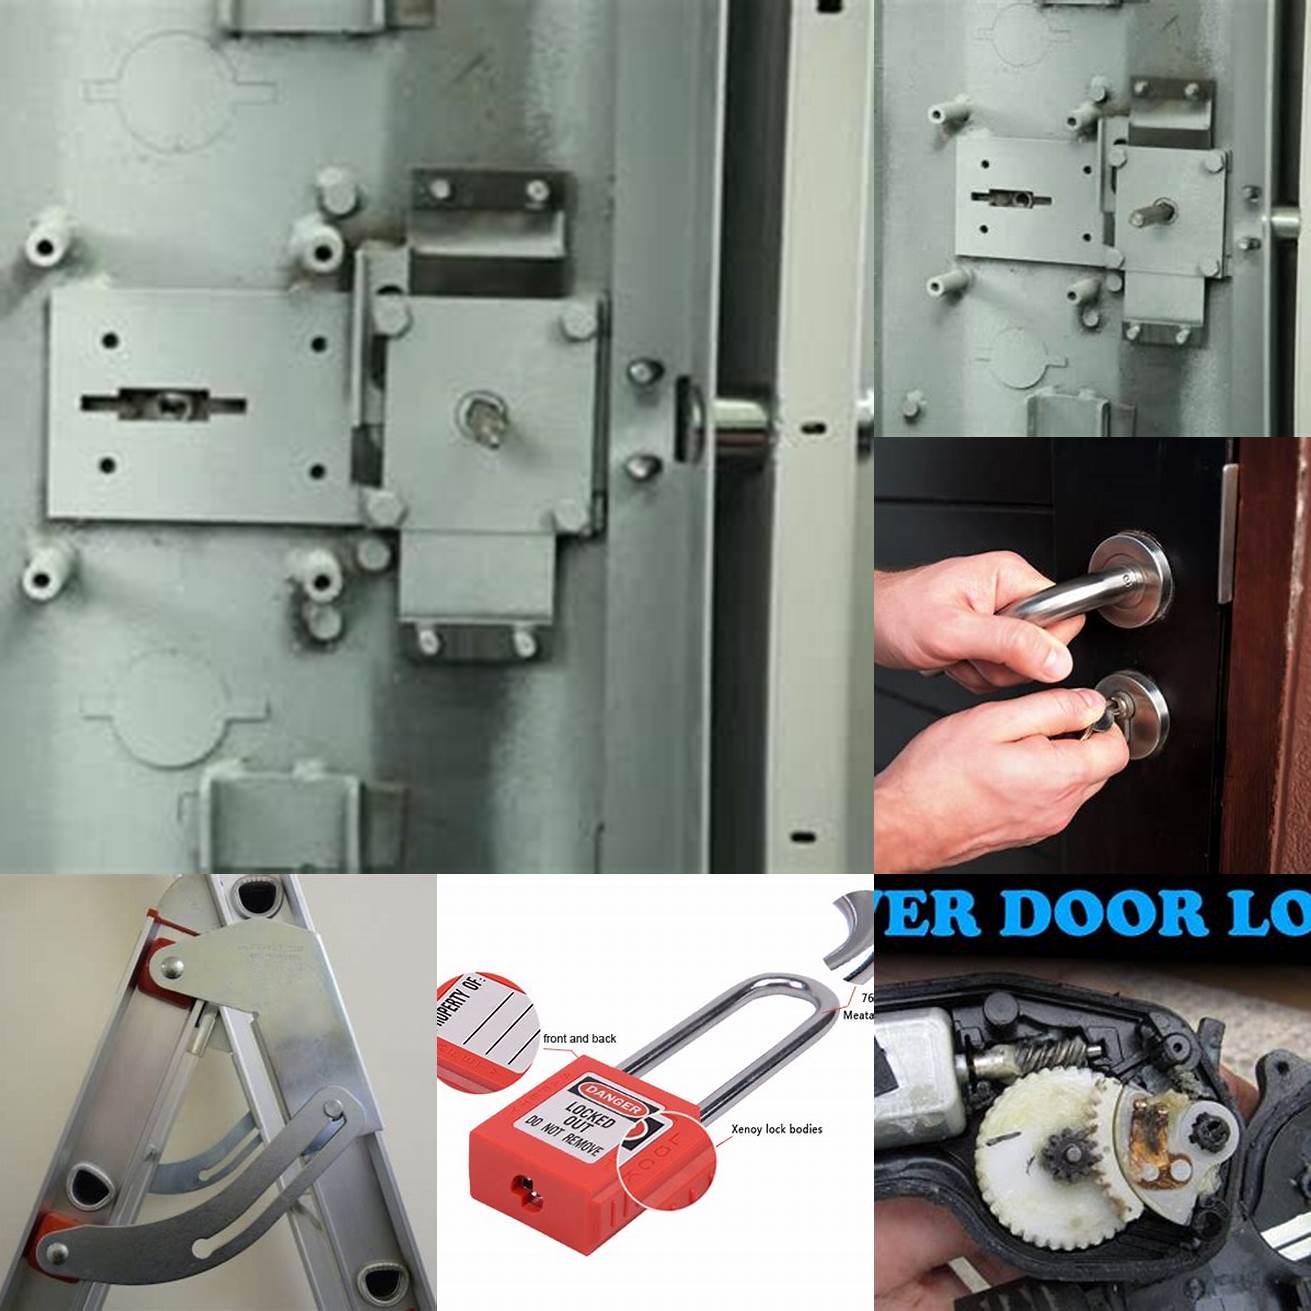 Check the locking mechanism regularly to ensure that its working properly